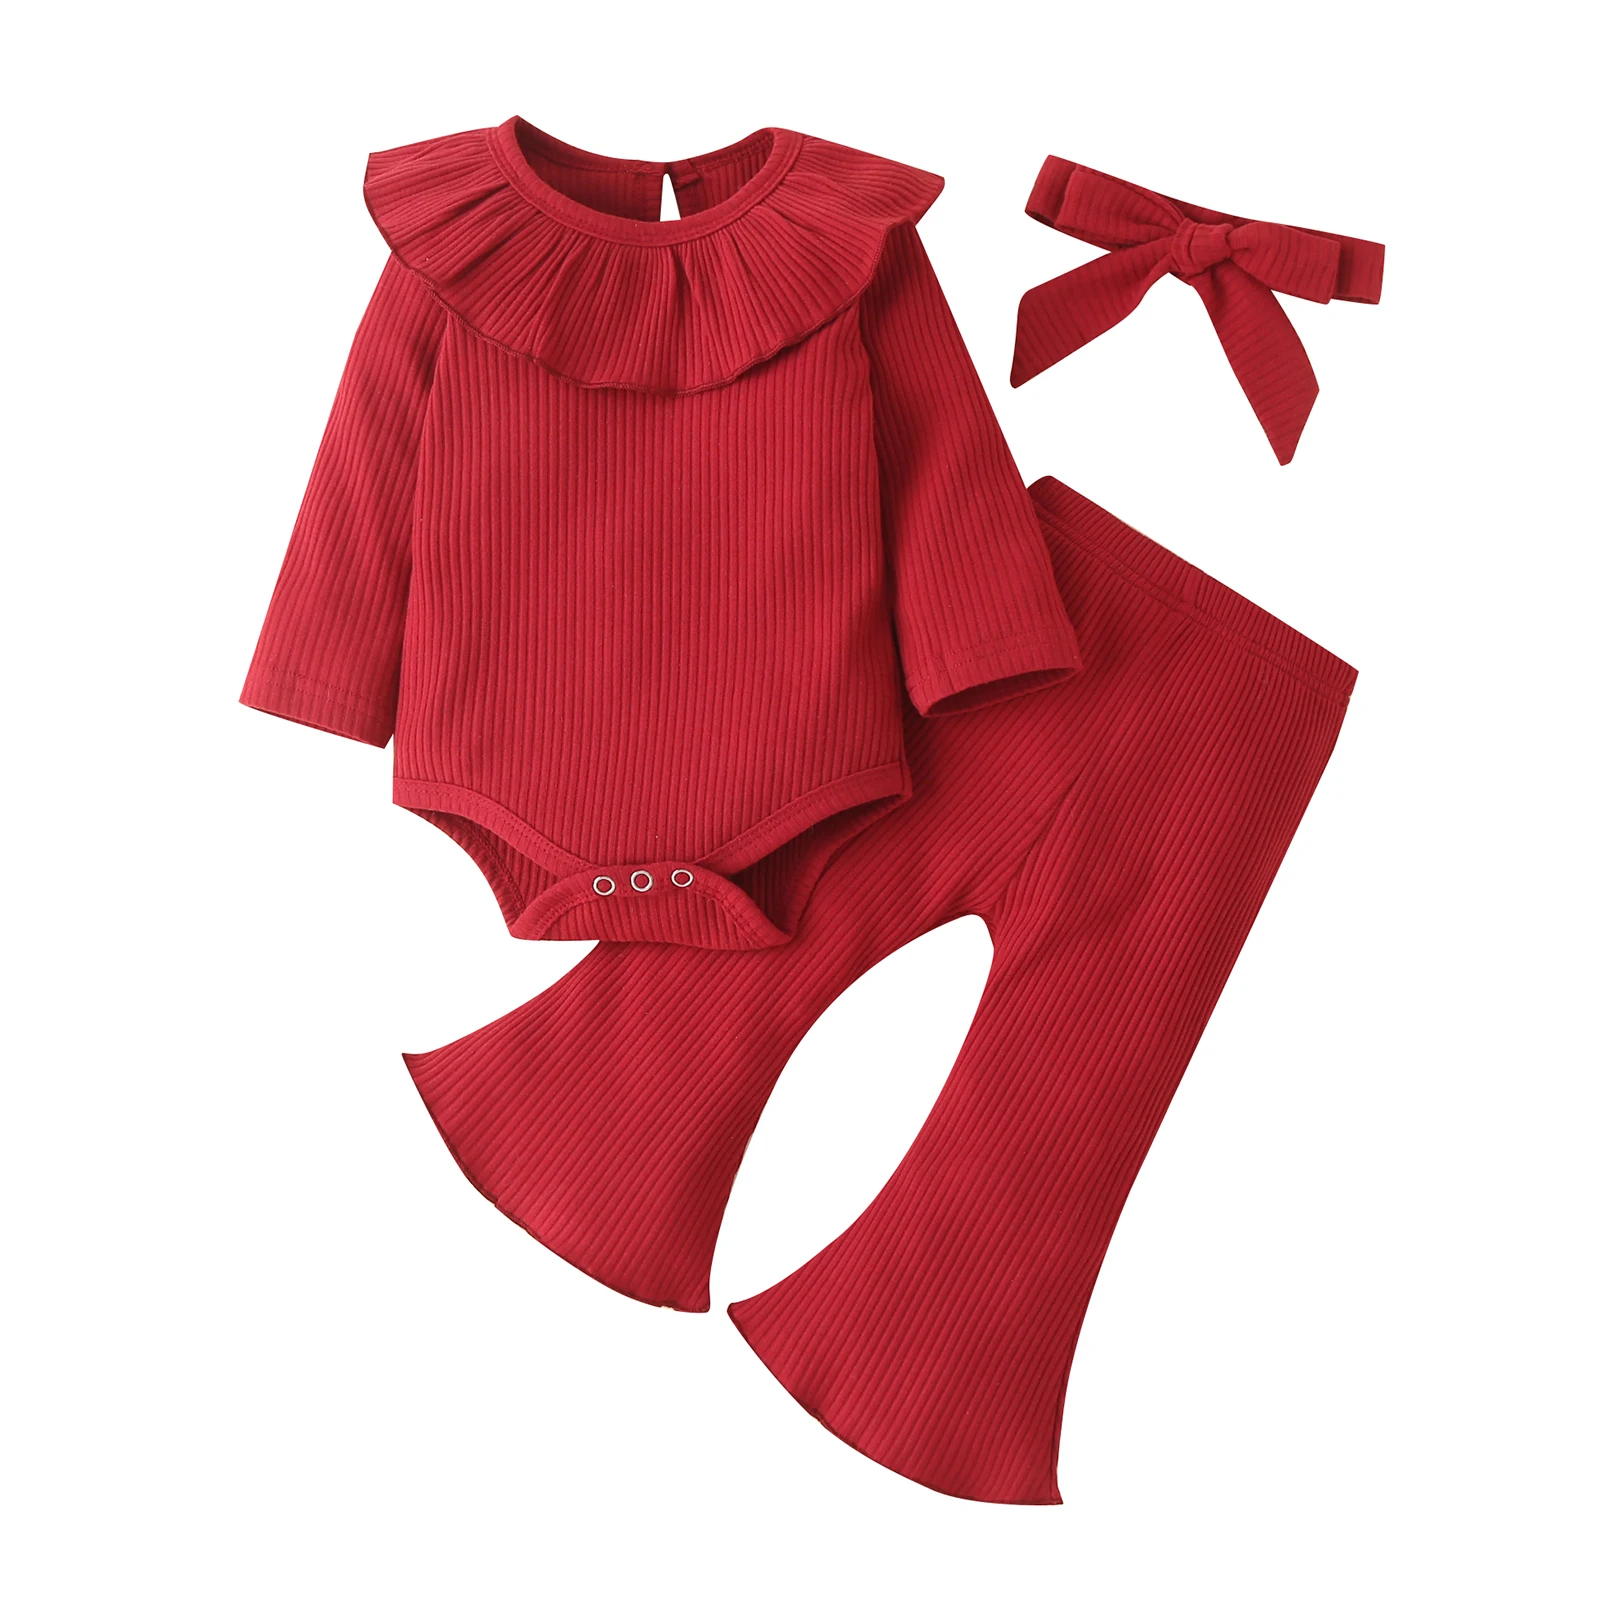 Infant Baby Girls Three-piece Clothes Set, Solid Color Romper, Flared Pants and Headdress, Red/ Pink/ Beige baby dress and set Baby Clothing Set